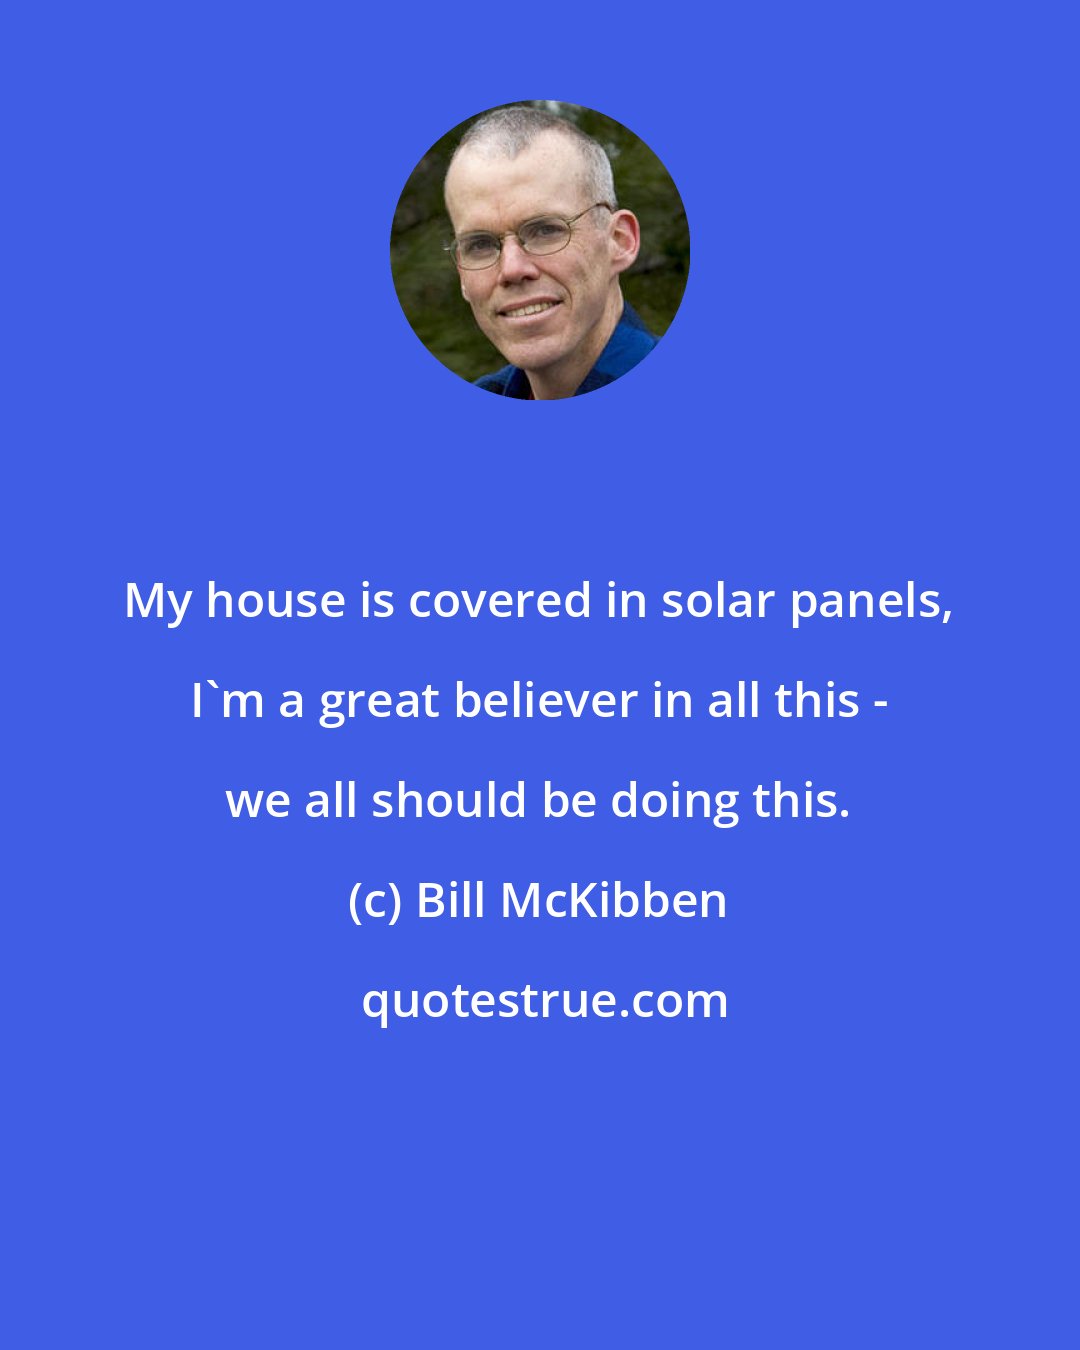 Bill McKibben: My house is covered in solar panels, I'm a great believer in all this - we all should be doing this.